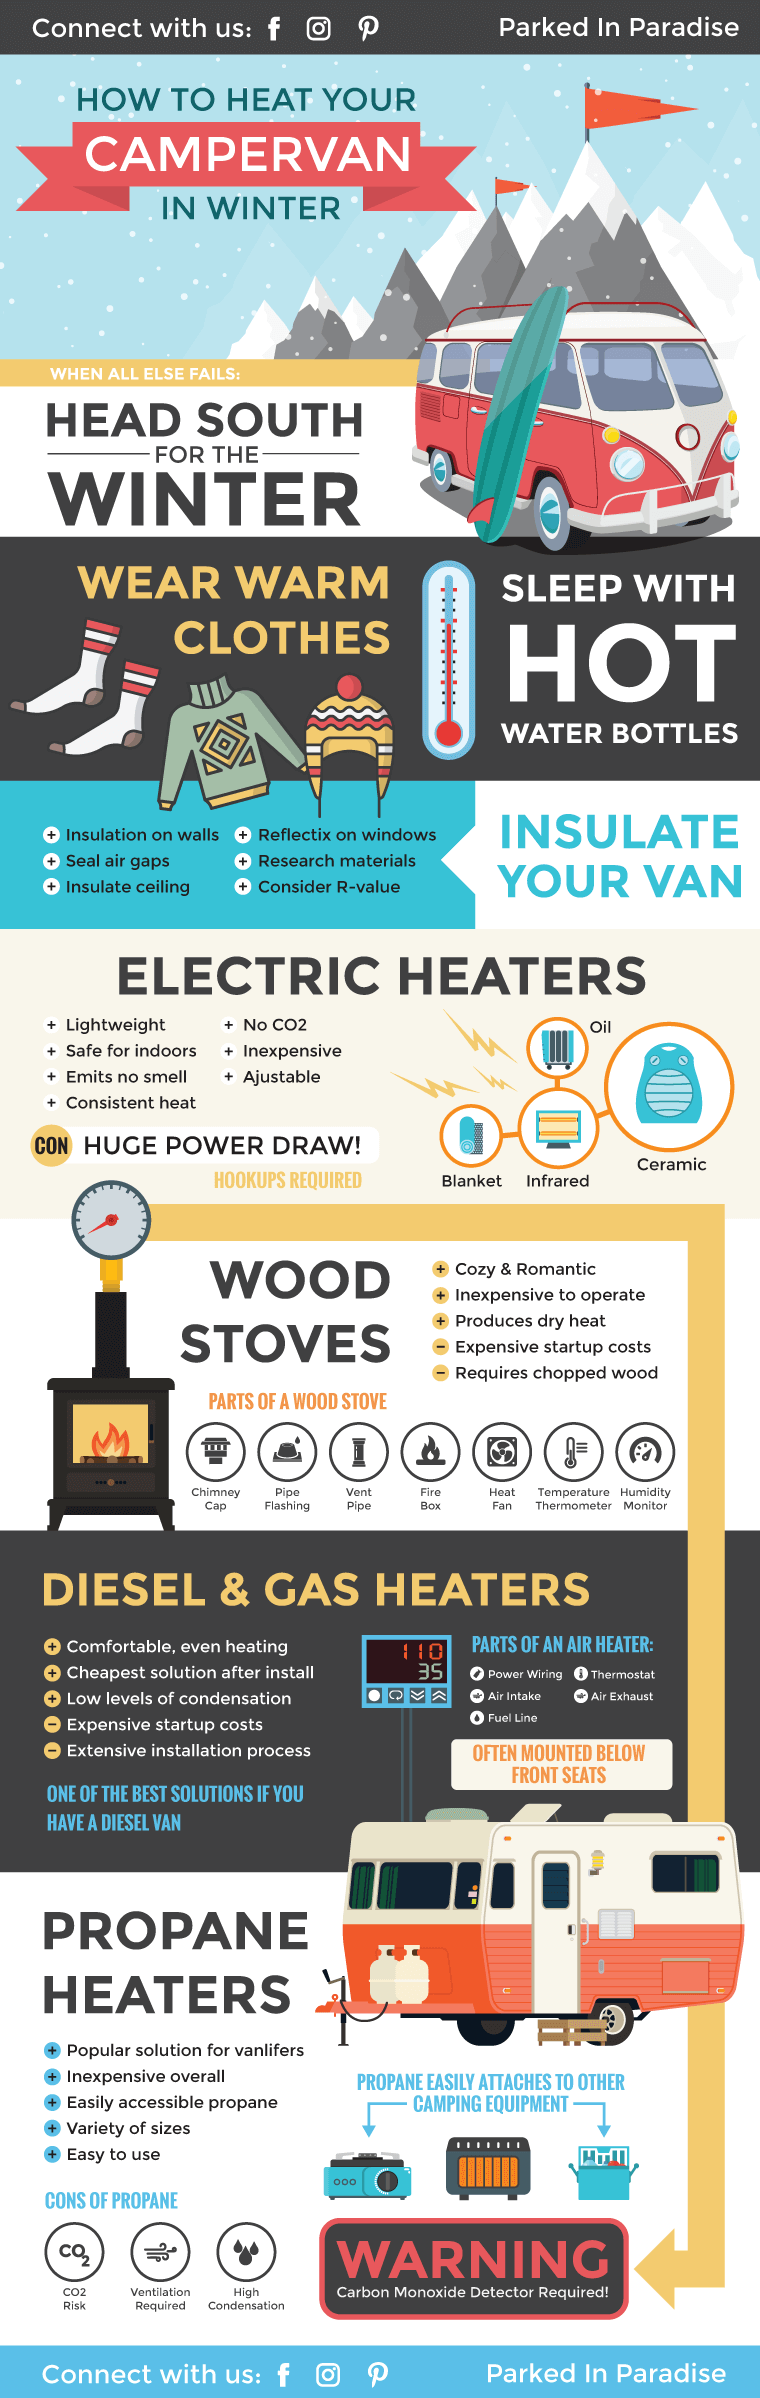 How To Heat Your Campervan Conversion In Winter